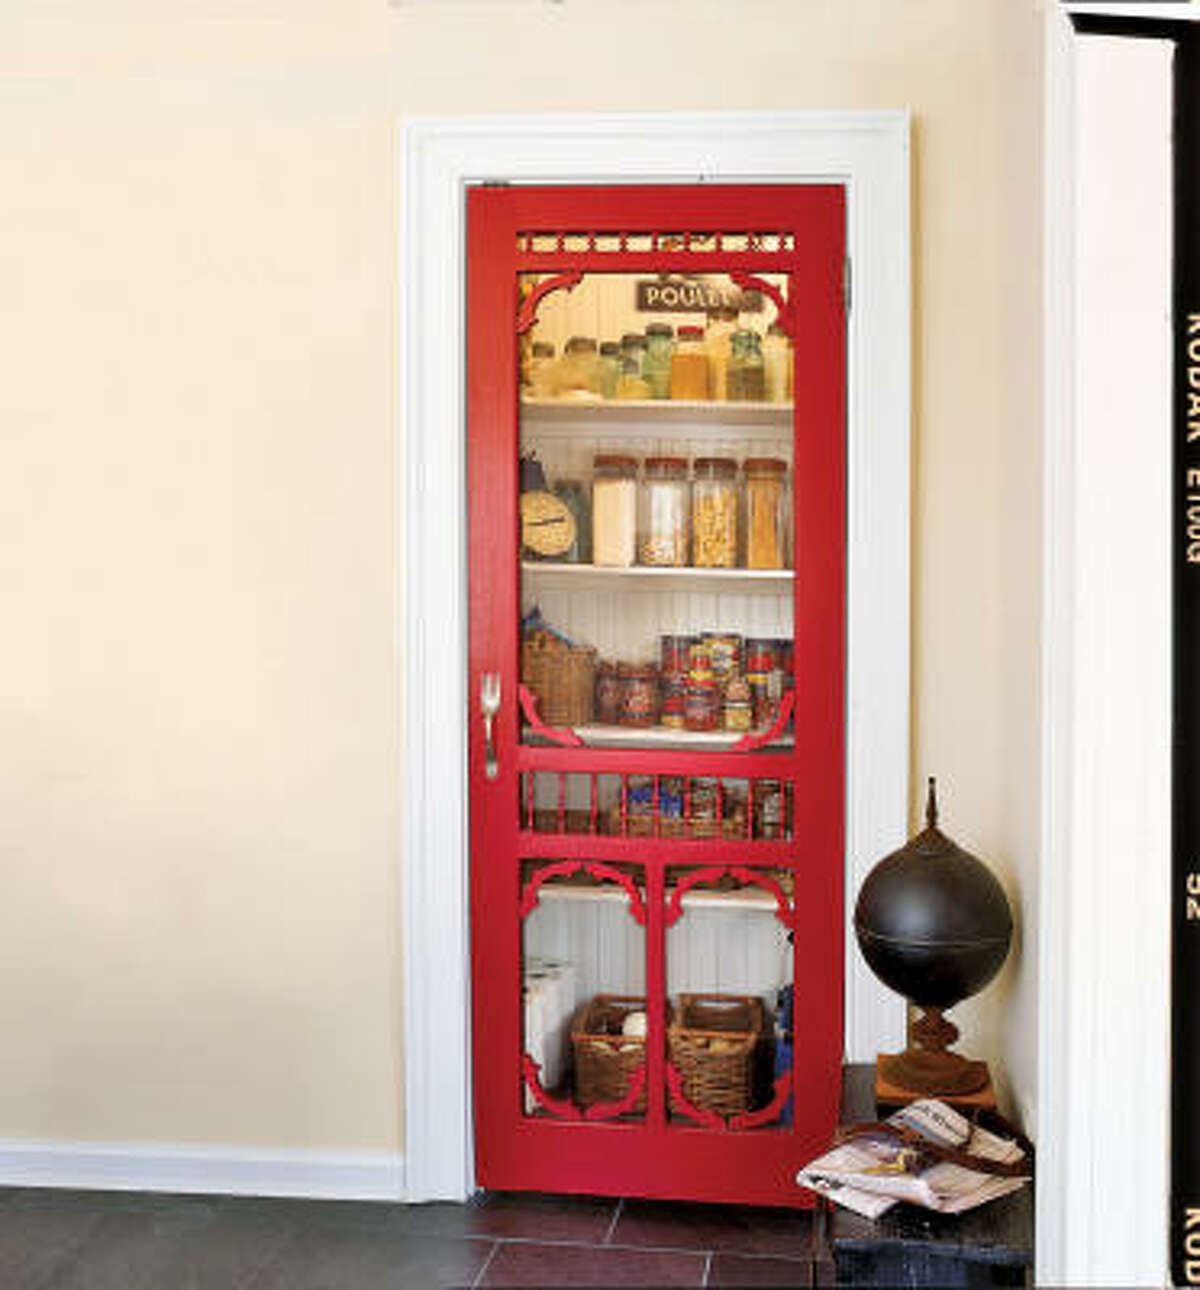 A painted screen door in a kitchen pantry becomes an interesting design element.